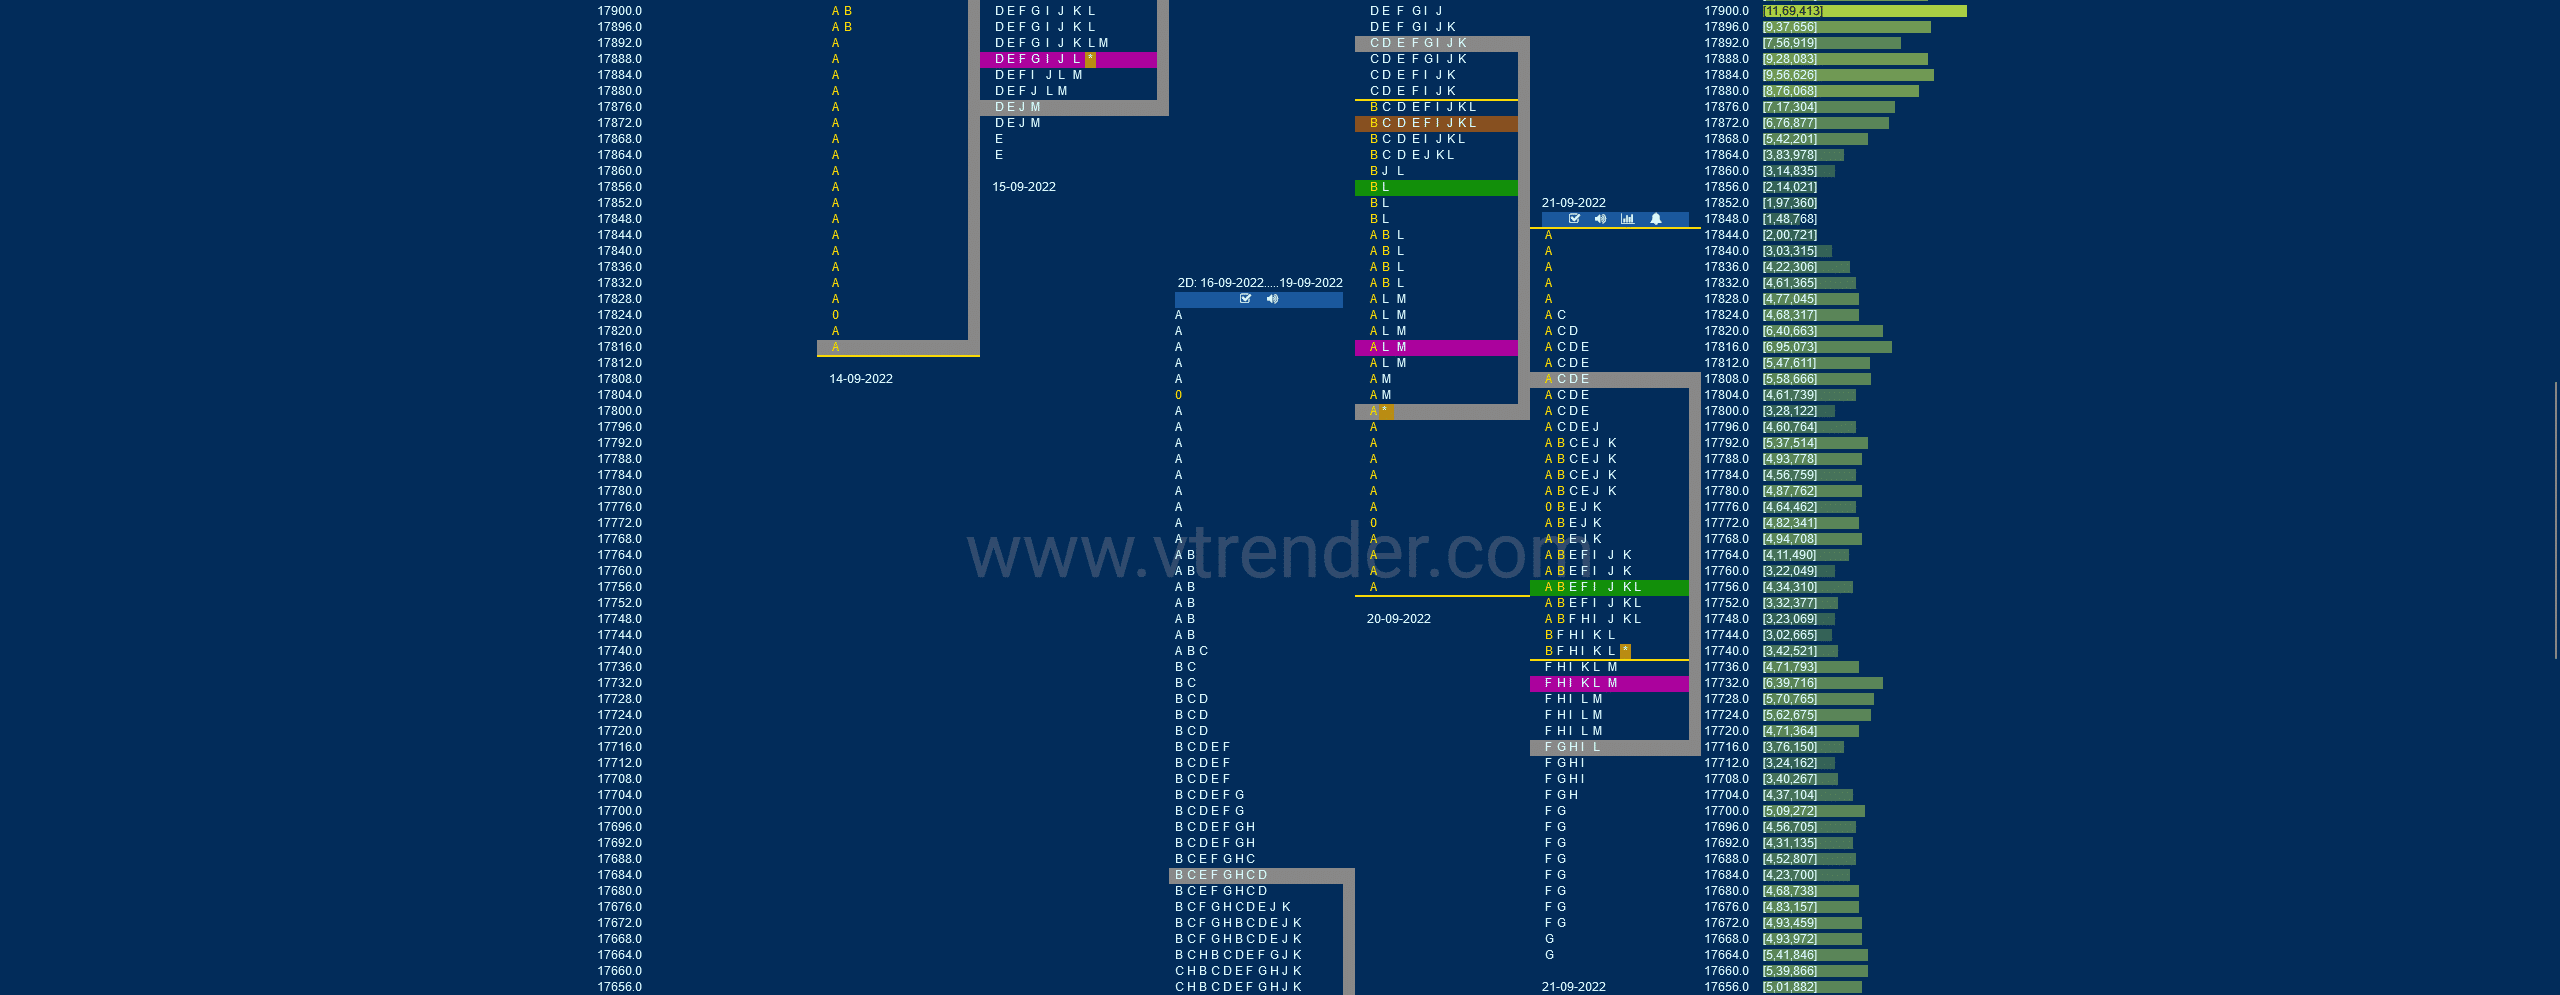 Nf 14 Market Profile Analysis Dated 21St Sep 2022 Banknifty Futures, Charts, Day Trading, Intraday Trading, Intraday Trading Strategies, Market Profile, Market Profile Trading Strategies, Nifty Futures, Order Flow Analysis, Support And Resistance, Technical Analysis, Trading Strategies, Volume Profile Trading